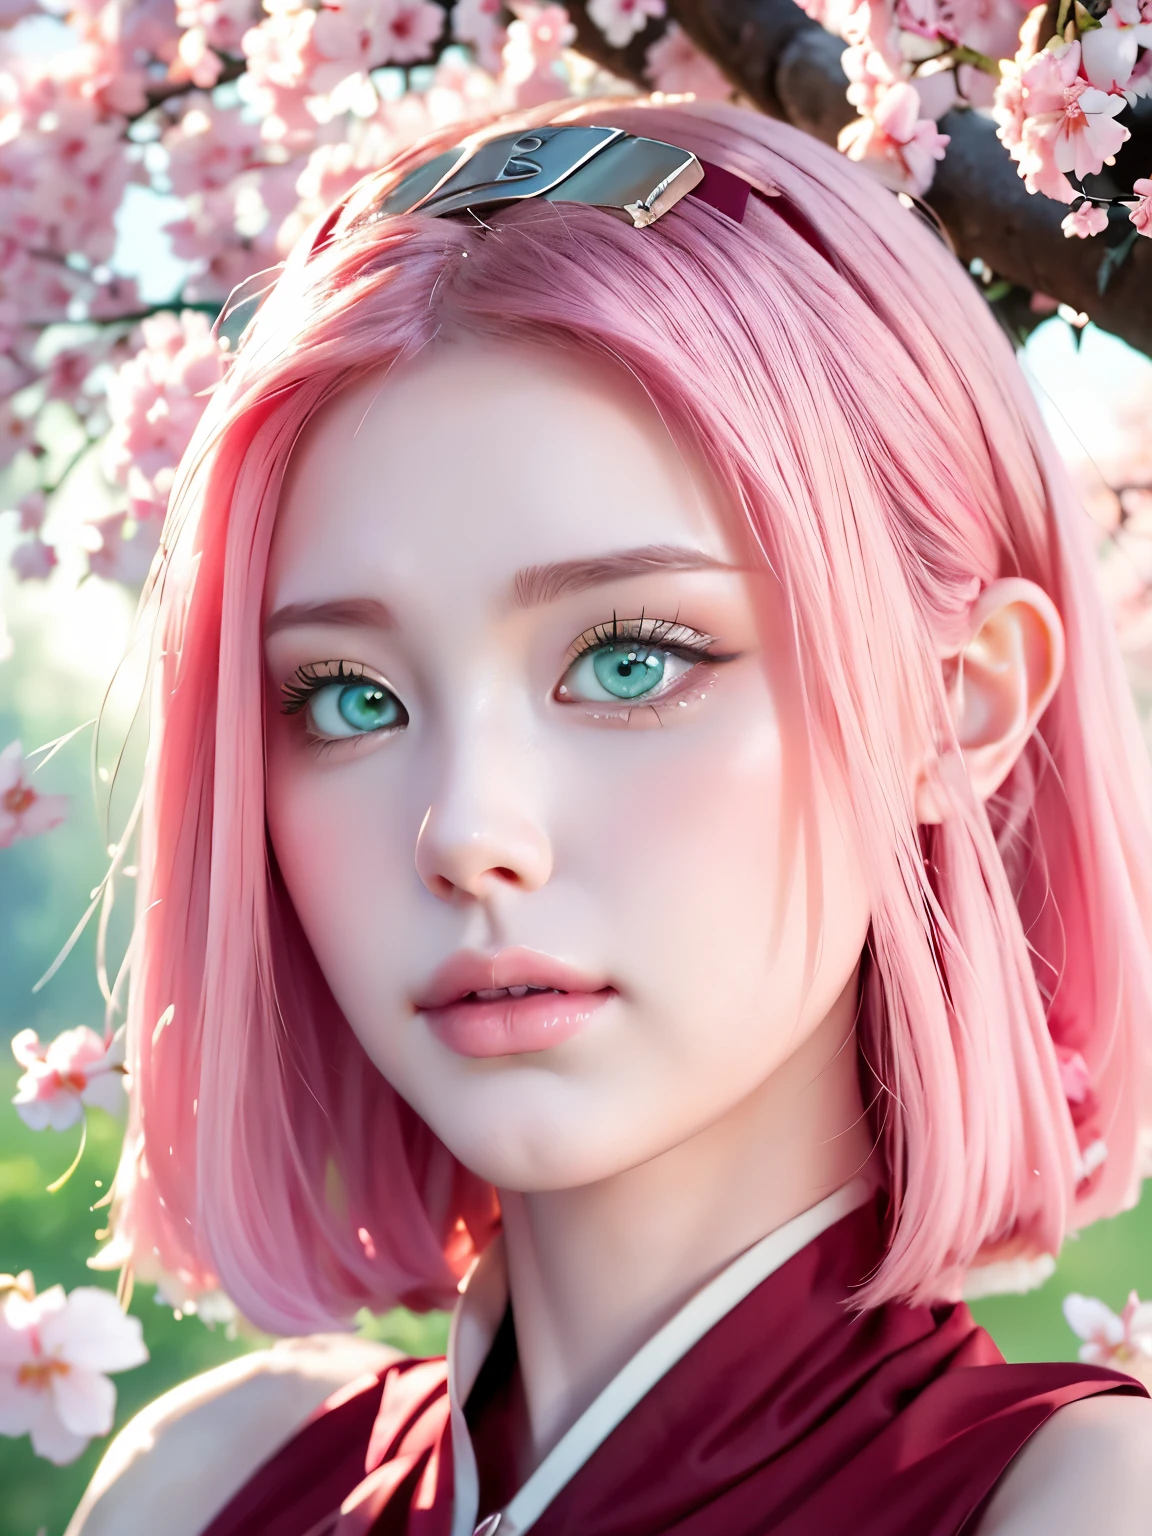 Sakura Haruno, has shoulder-length pink hair, she has emerald eyes, a sharp nose, white skin, and a soft face, (best quality, highres:1.2), 1girl, beautiful detailed eyes, beautiful detailed lips, extremely detailed eyes and face, long eyelashes, HDR, studio lighting, sharp focus, physically-based rendering, extreme detail description,  perfect shape, facing viewer, sweaty, gorgeous, appearing in full frame, good-looking, Beautiful fair skin and luster, Beautiful eyes are big and bright, Small mouth and thin lips, Goodness of style and slendernes,), beautiful girl illuminated by seven colors of light, Irridescent coloe, showing off her figure, seductive and confident, enchanting aura, surrounded by cherry blossom trees, delicate and vibrant petals falling all around her, soft pink and white colors, sunlight filtering through the trees, creating a warm and dreamy atmosphere, no nsfw.